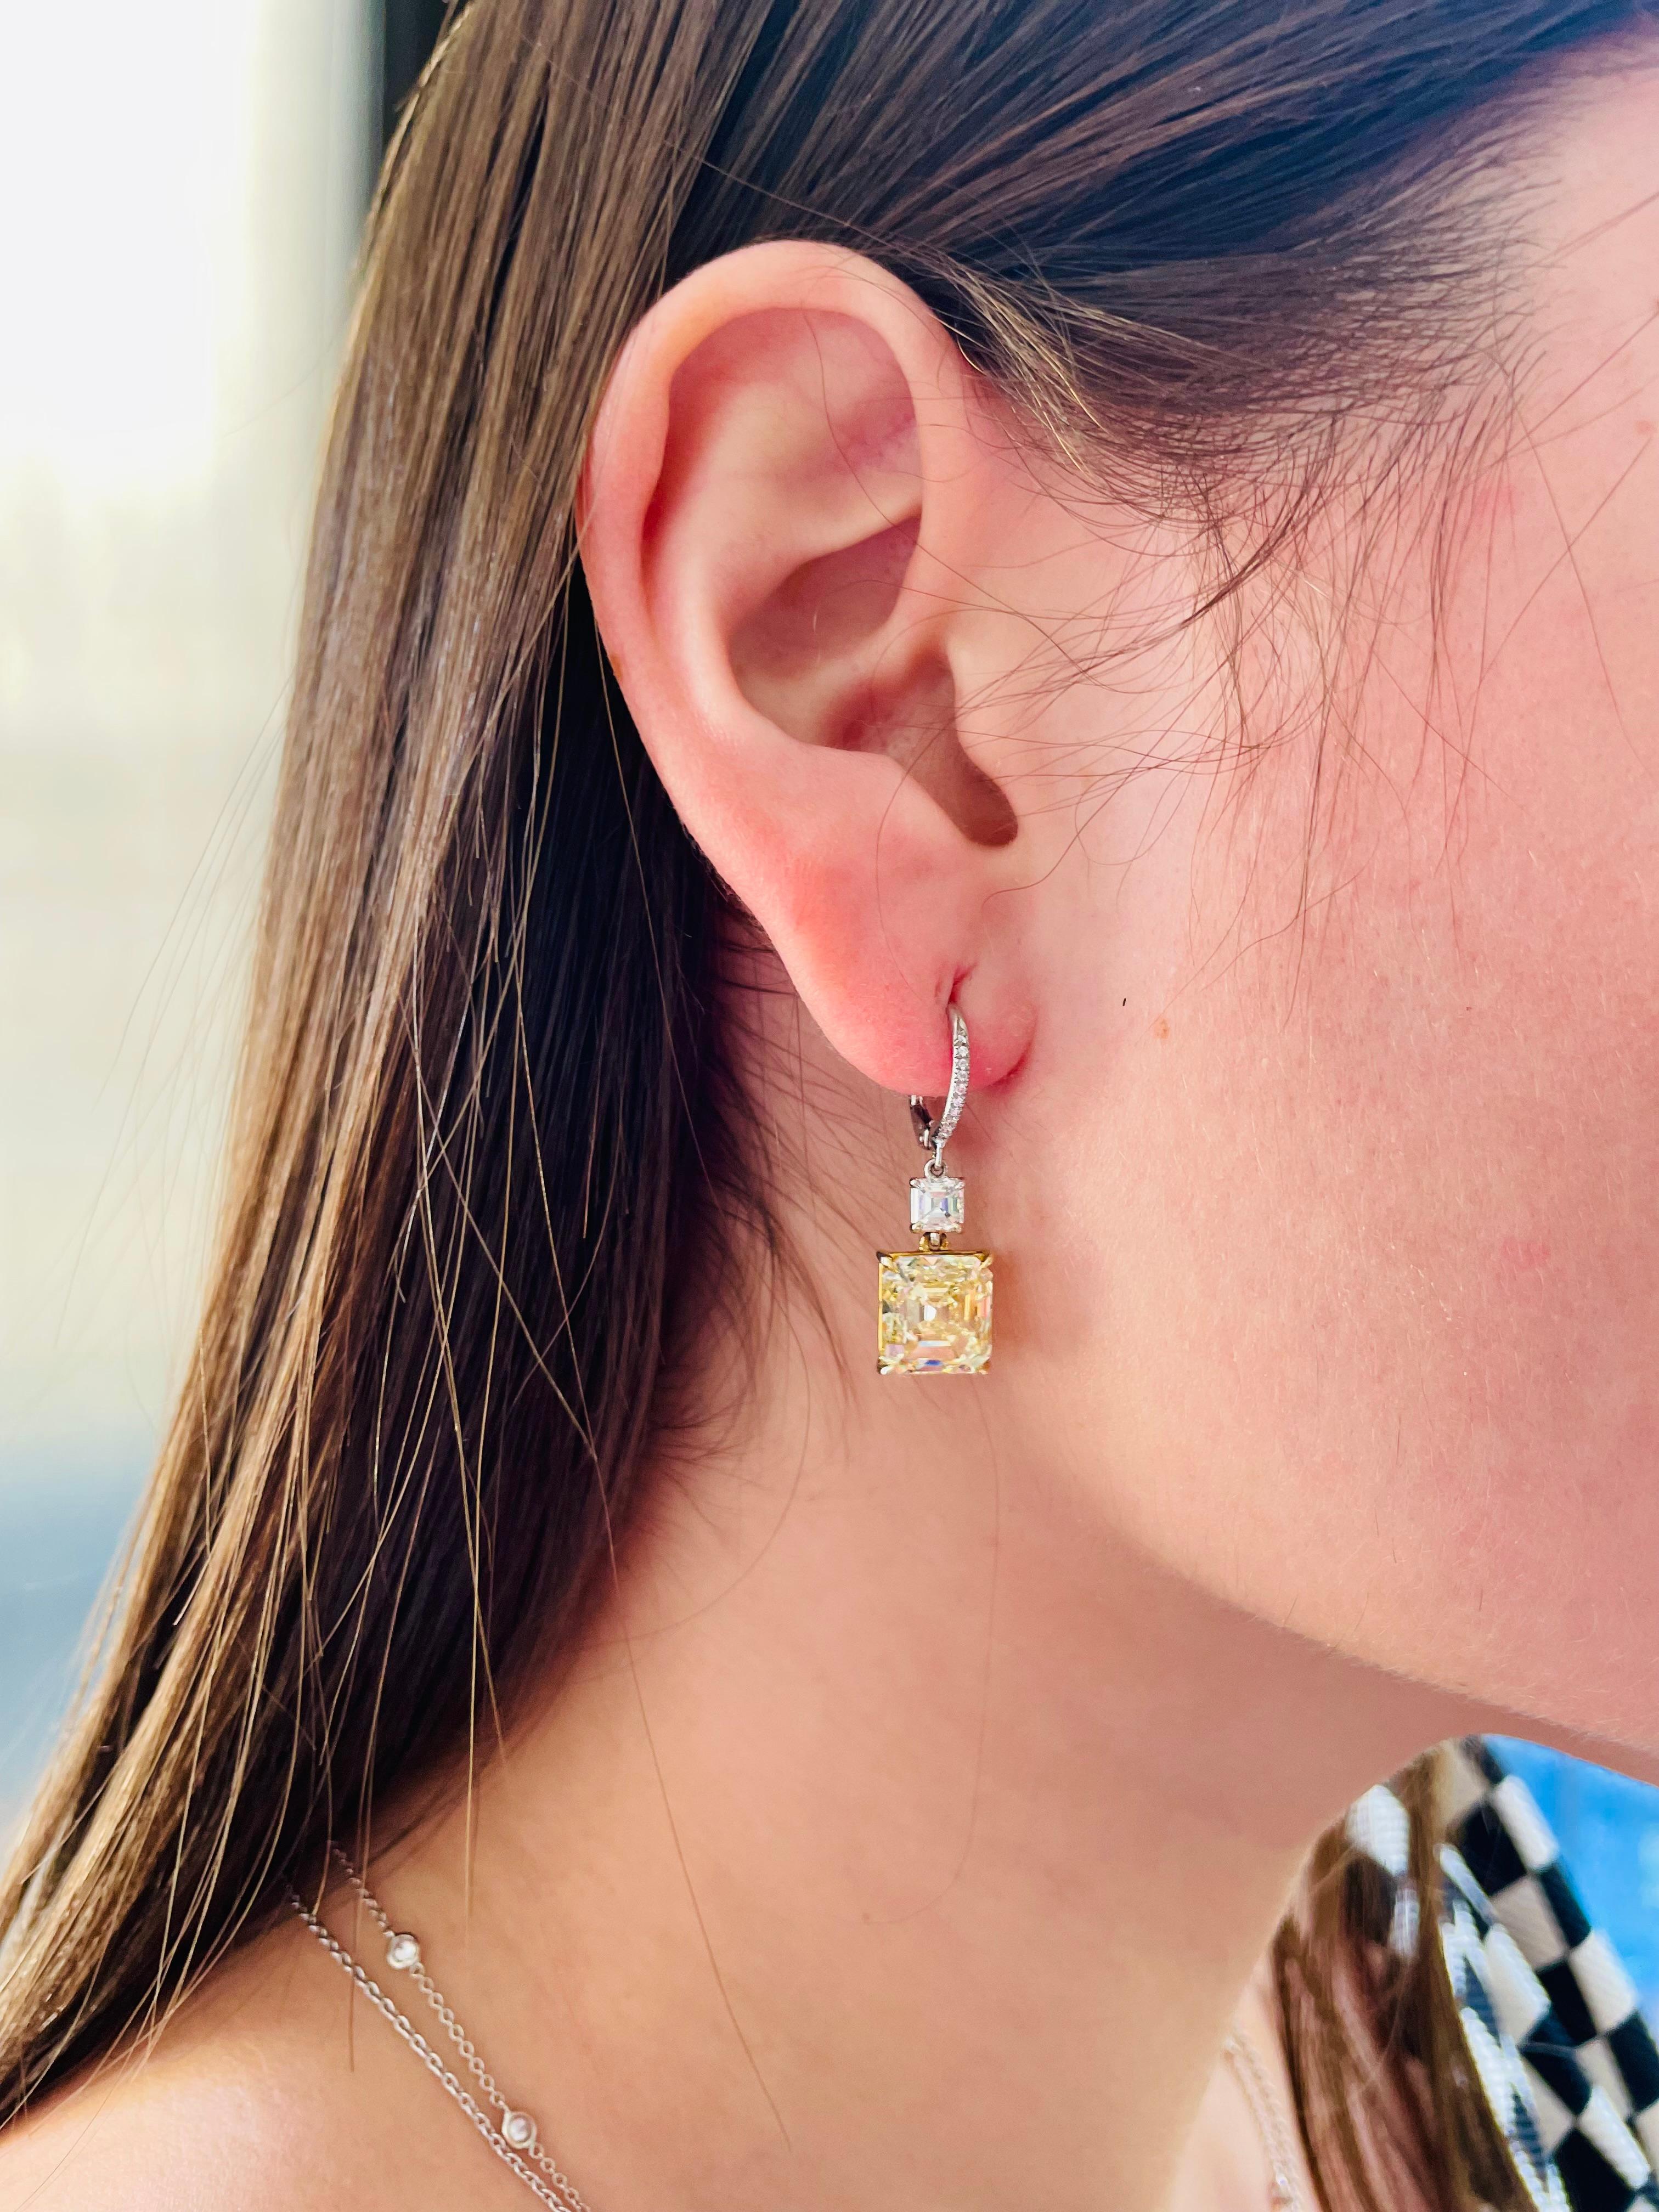 From the J. Birnbach Collection of fancy yellow diamonds, these sophisticated drop earrings showcase 5.11 carat and 5.02-carat Fancy yellow asscher-cut diamonds that drop from two white 0.70-carat asscher diamonds. These elegant earrings made with